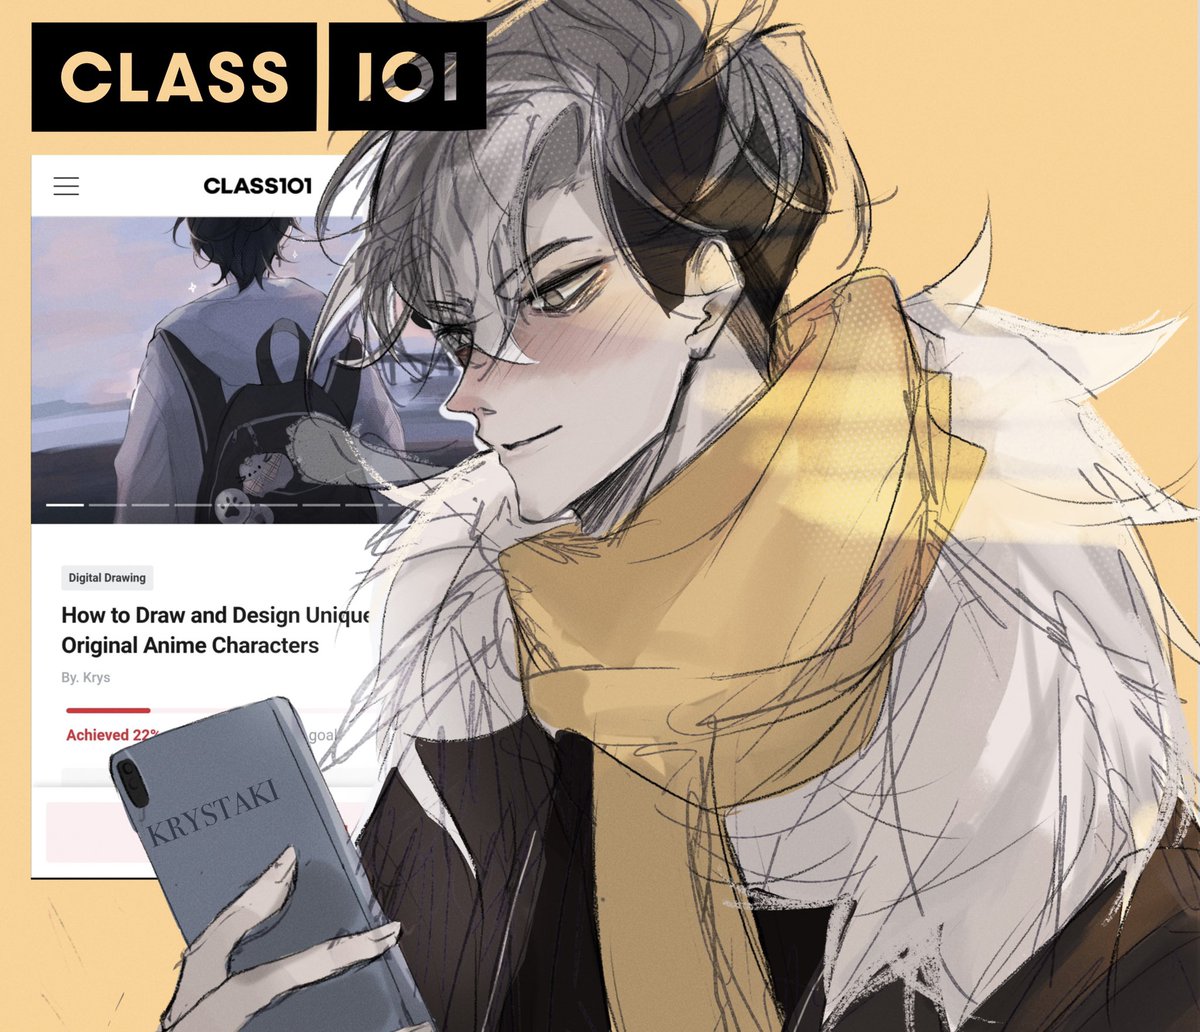 retweets appreciated!!

I'm testing this idea with @class101us for an online class for any beginner/intermediate artist! I need to reach 200 supporters so please go to this link and support me if you are even slightly interested! 

https://t.co/tOI2vuAvGr 